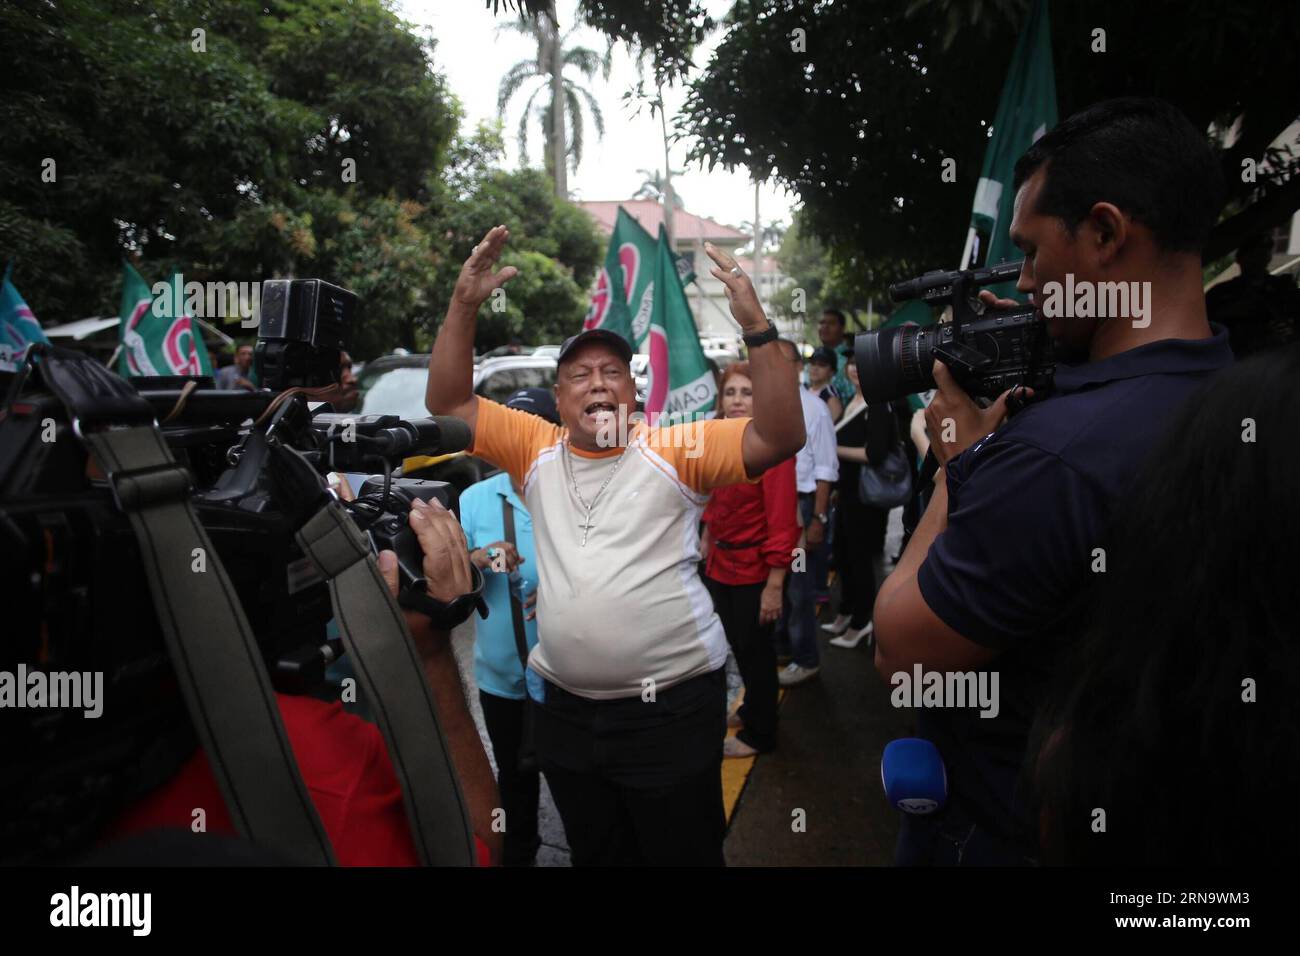 (151222) -- PANAMA CITY, Dec. 21, 2015 -- Members of the political party Democratic Change shout slogans in front of the Supreme Court of Justice in Panama City, capital of Panama, on Dec. 21, 2015. According to local press, the plenary of the Supreme Court of Justice held on Monday an oral and public audience, aiming to consider the request of provisional detention against the former Panamanian president (2009-2014) and deputy of the Central American Parliament, Ricardo Martinelli. ) PANAMA-PANAMA CITY-JUSTICE-MARTINELLI MauricioxValenzuela PUBLICATIONxNOTxINxCHN   151222 Panama City DEC 21 2 Stock Photo